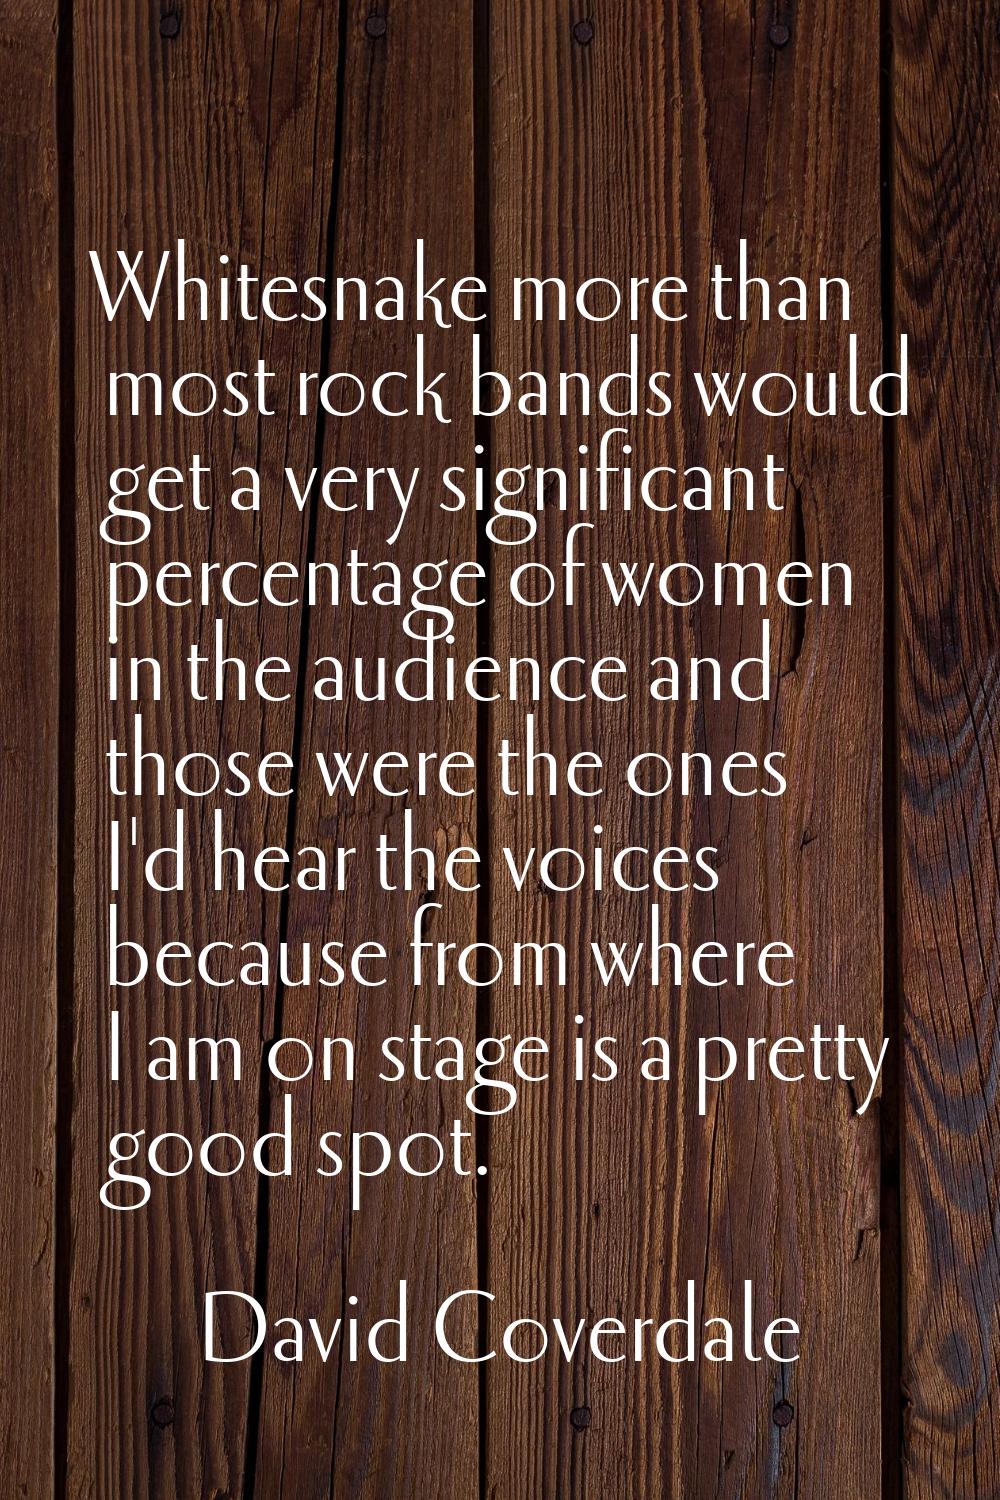 Whitesnake more than most rock bands would get a very significant percentage of women in the audien